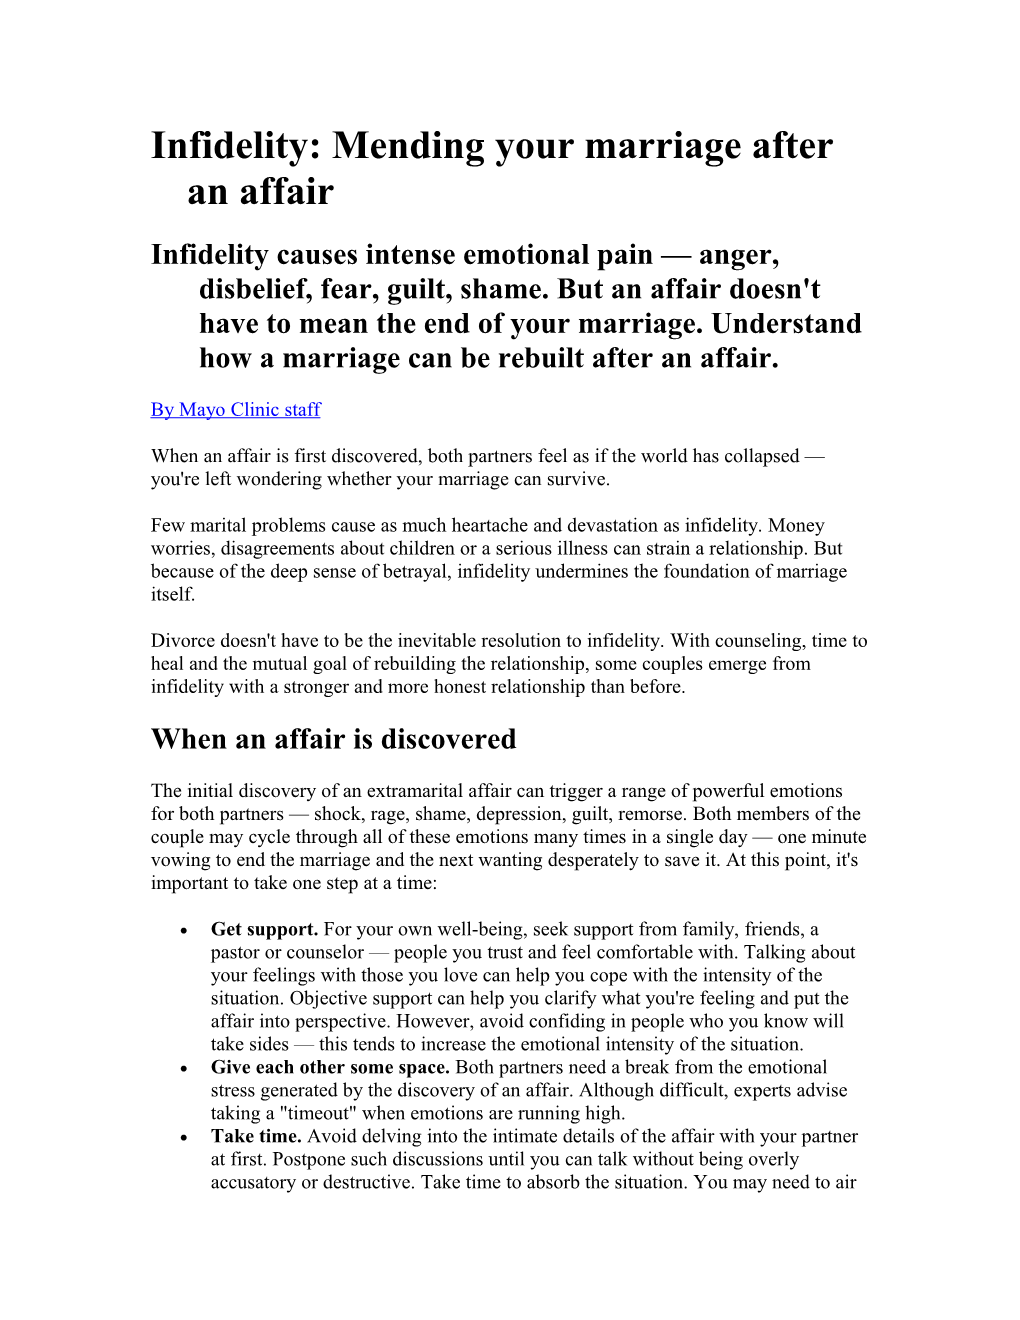 Infidelity: Mending Your Marriage After An Affair